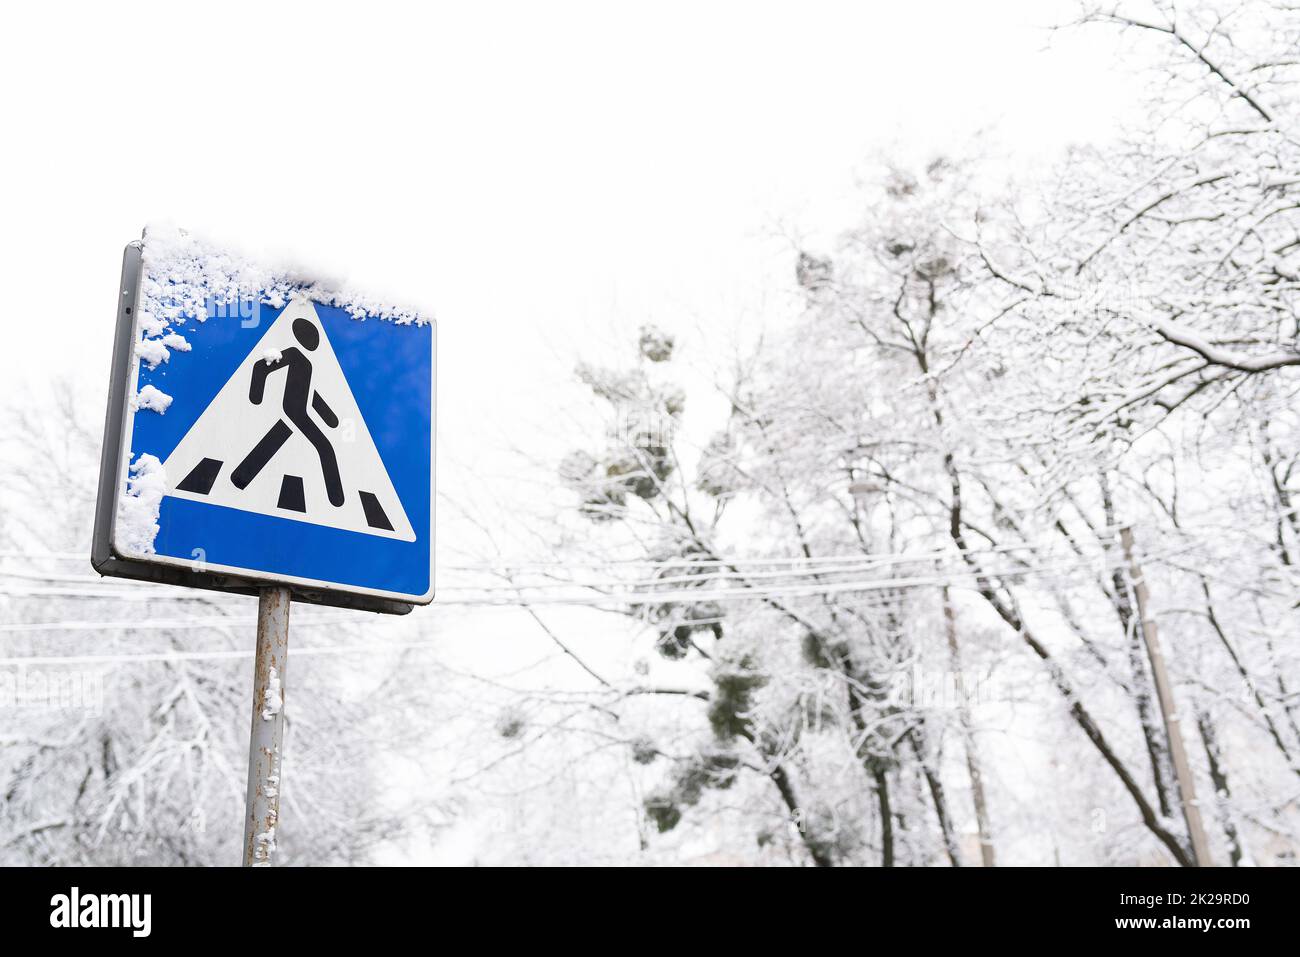 Frozen pedestrian sign covered in snow on a frosty snowy day. Stock Photo